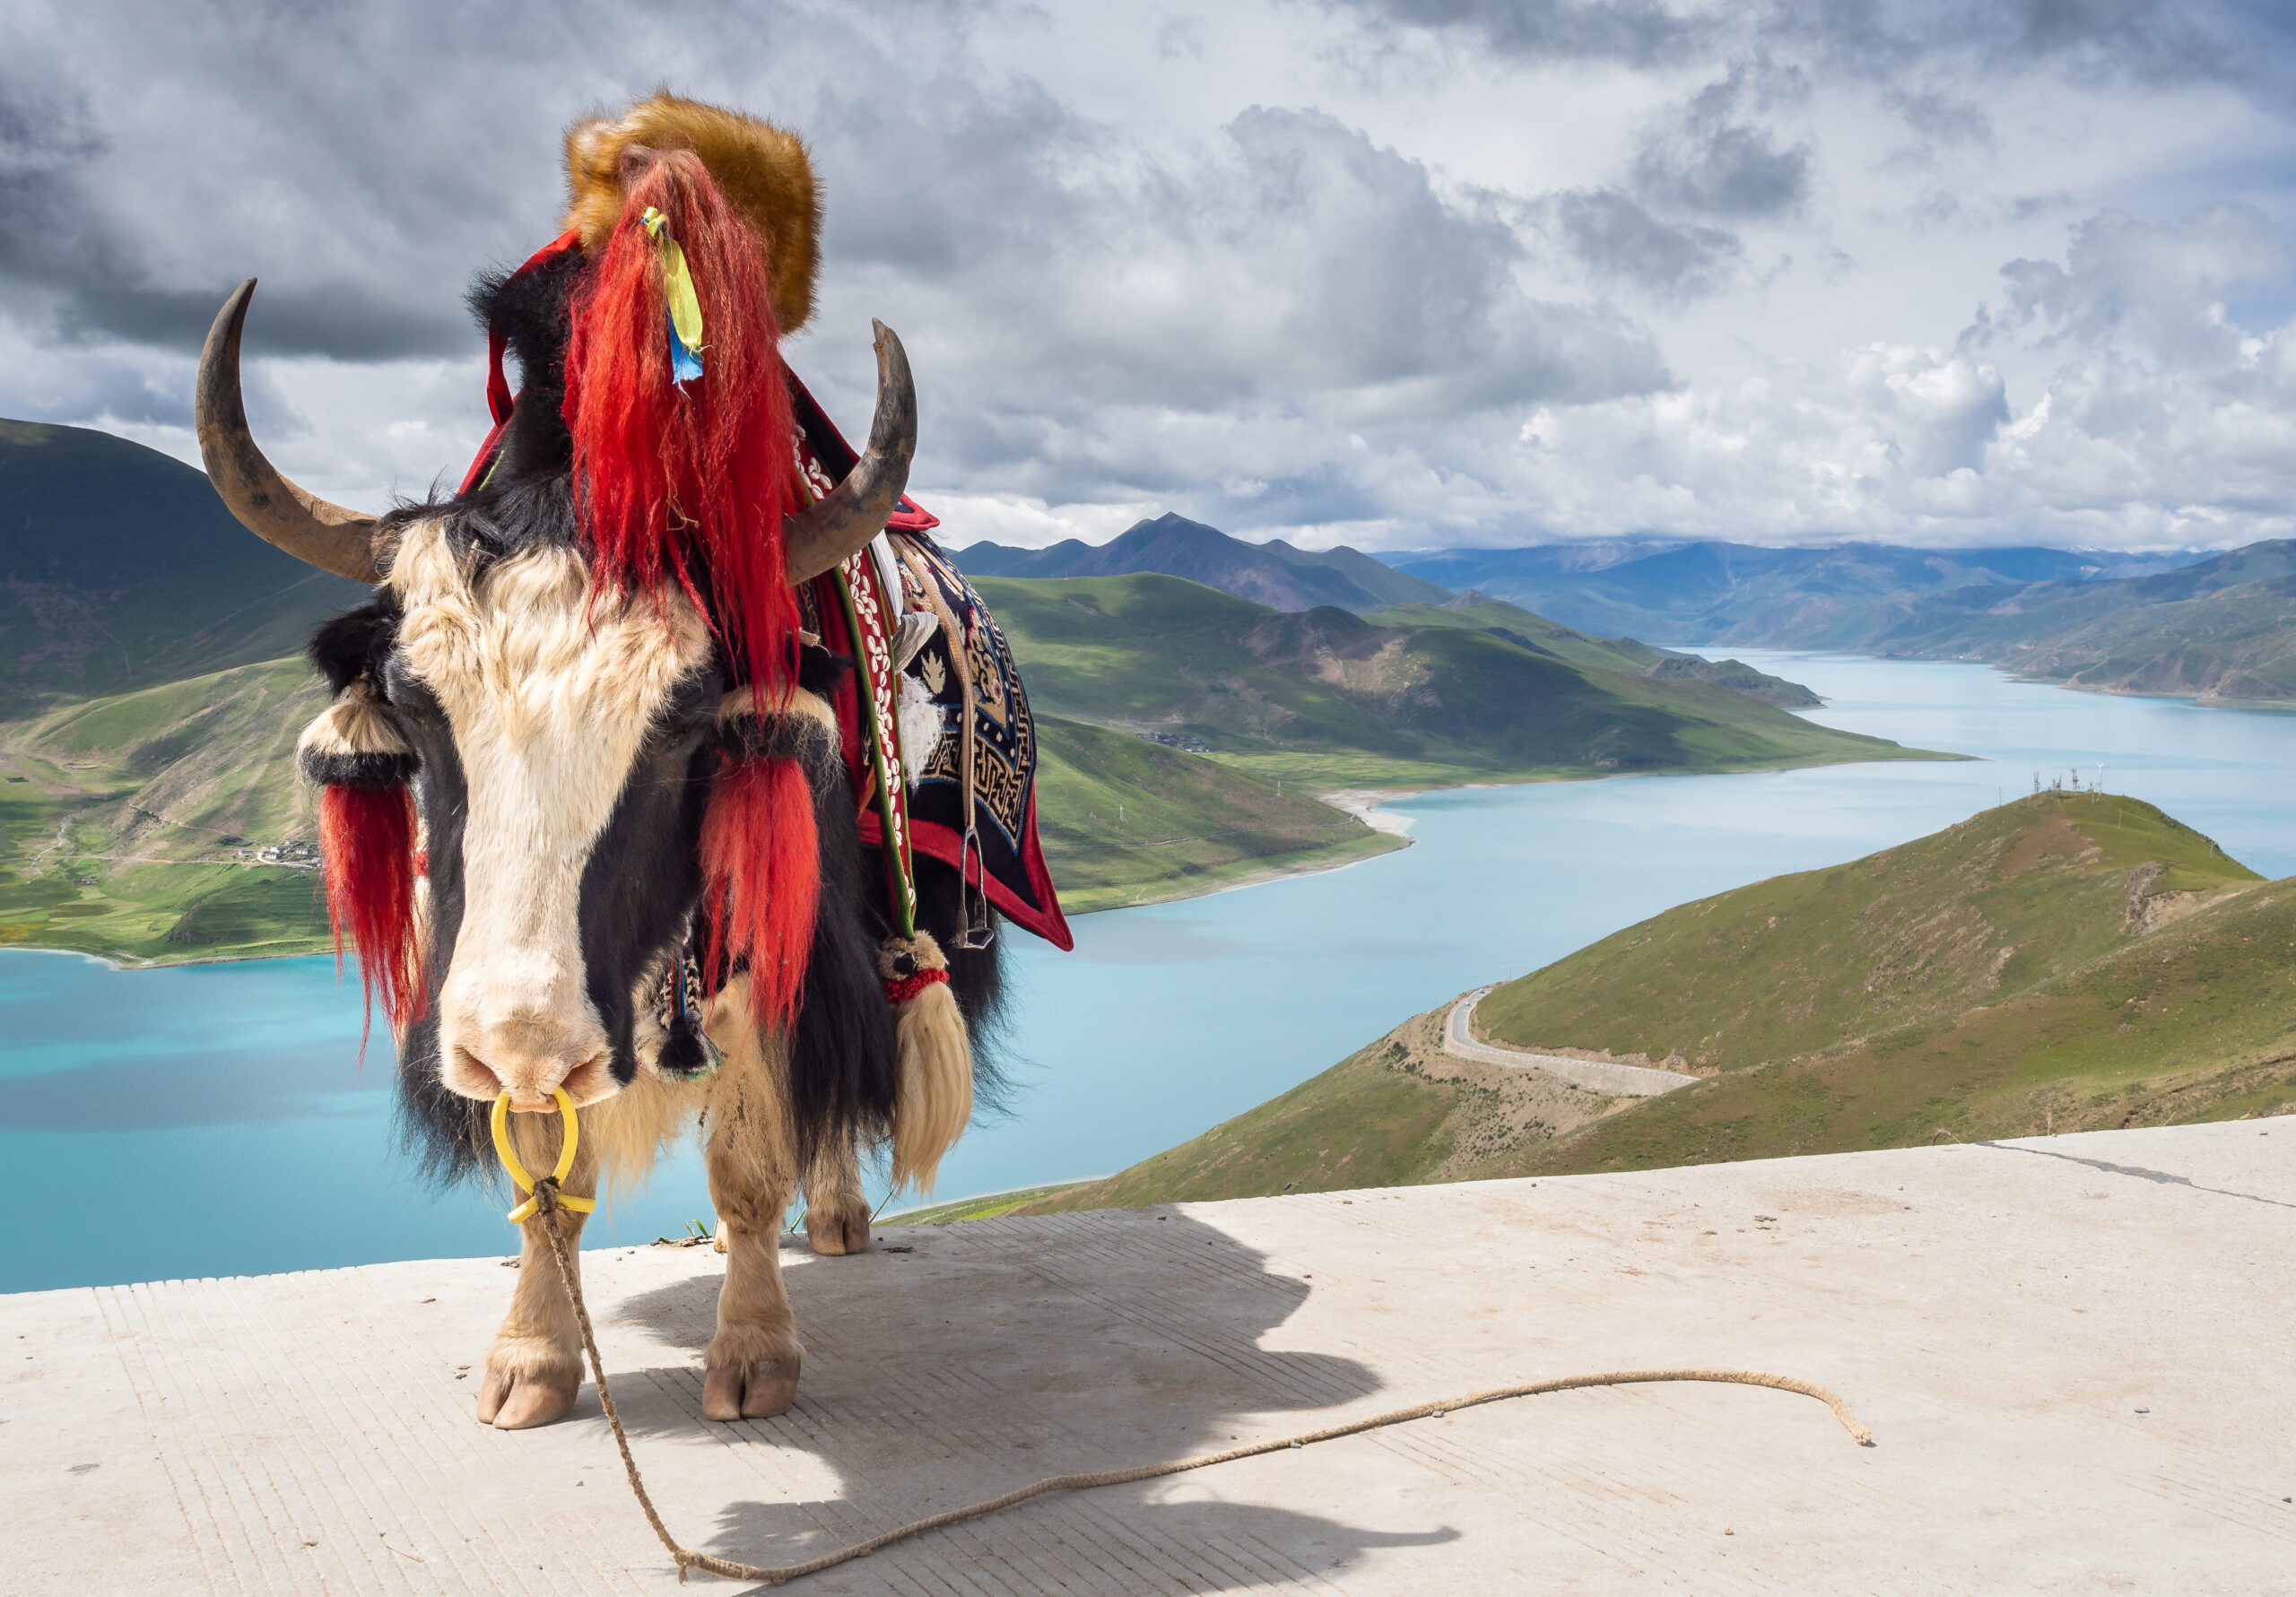 Amazing cow with beautiful saddle standing on background of tranquil river and green hills on cloudy day in Tibet